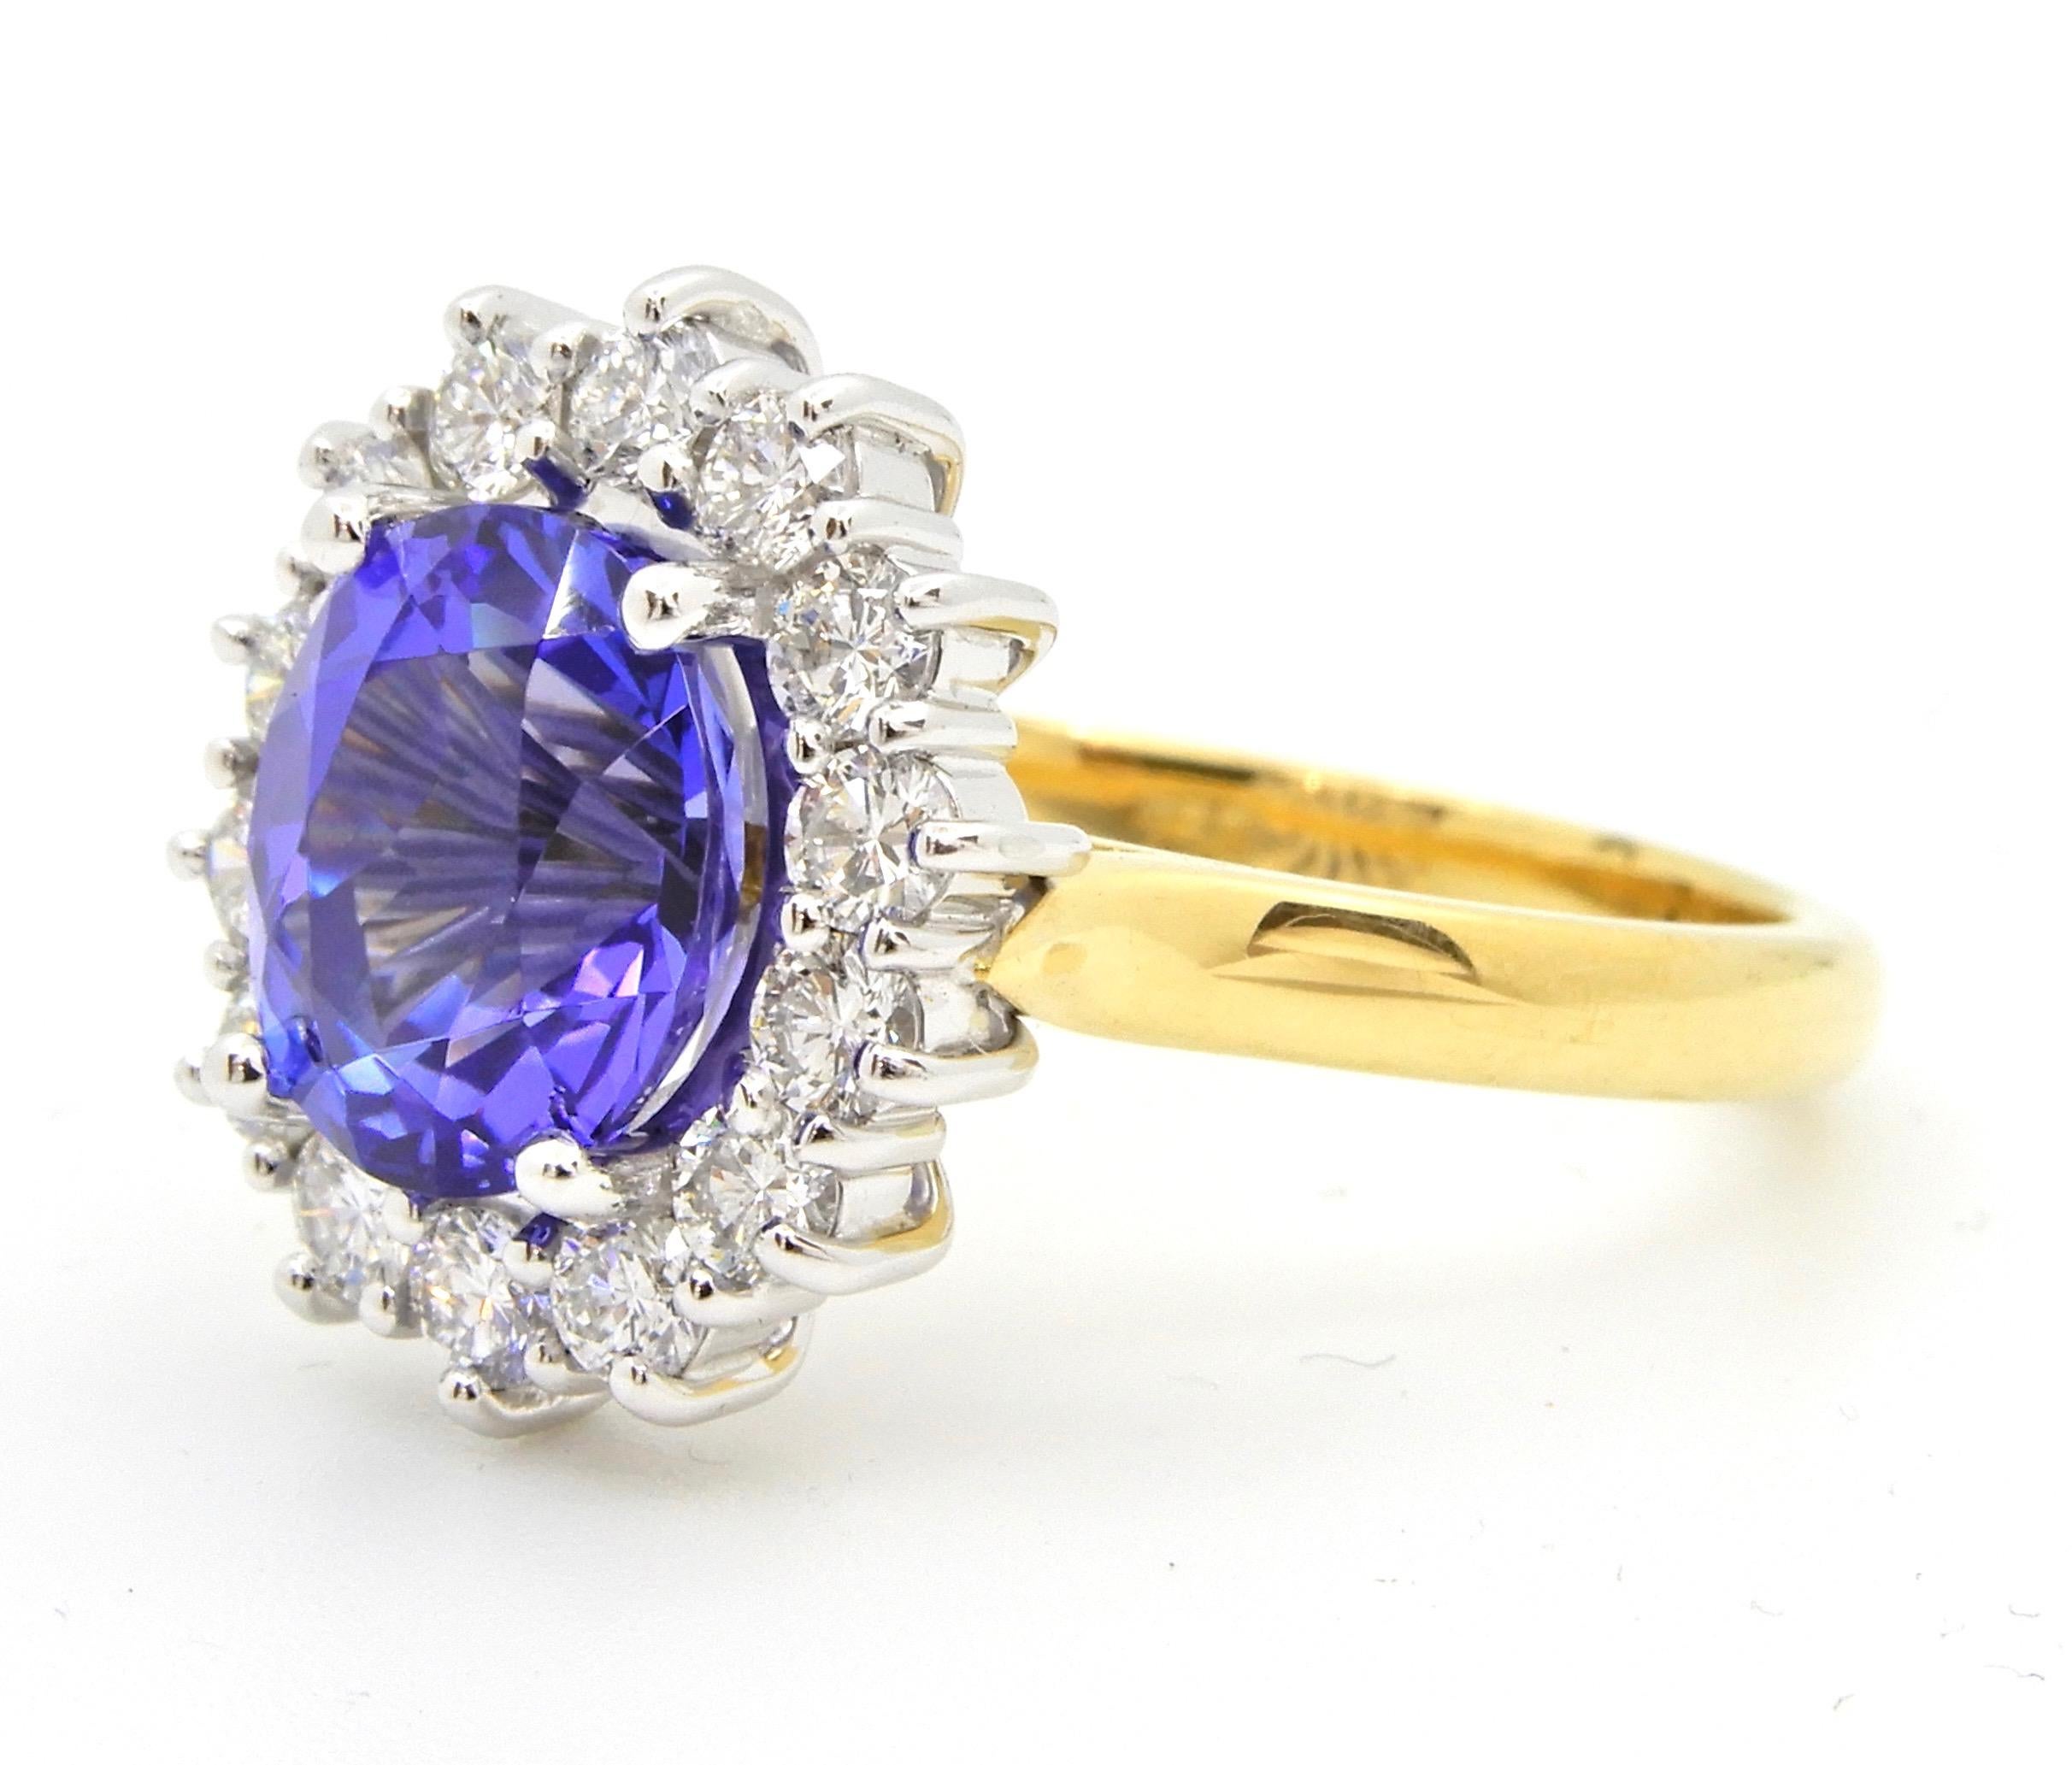 This 2.93 Carat Oval Cut Tanzanite and Diamond Handmade 18 Carat Cocktail Ring is set in 18 carat gold. The slightly rounded, flat edge, yellow gold band rises to a white gold 4 claw set oval Tanzanite of a beautiful, bright blue colour surrounded